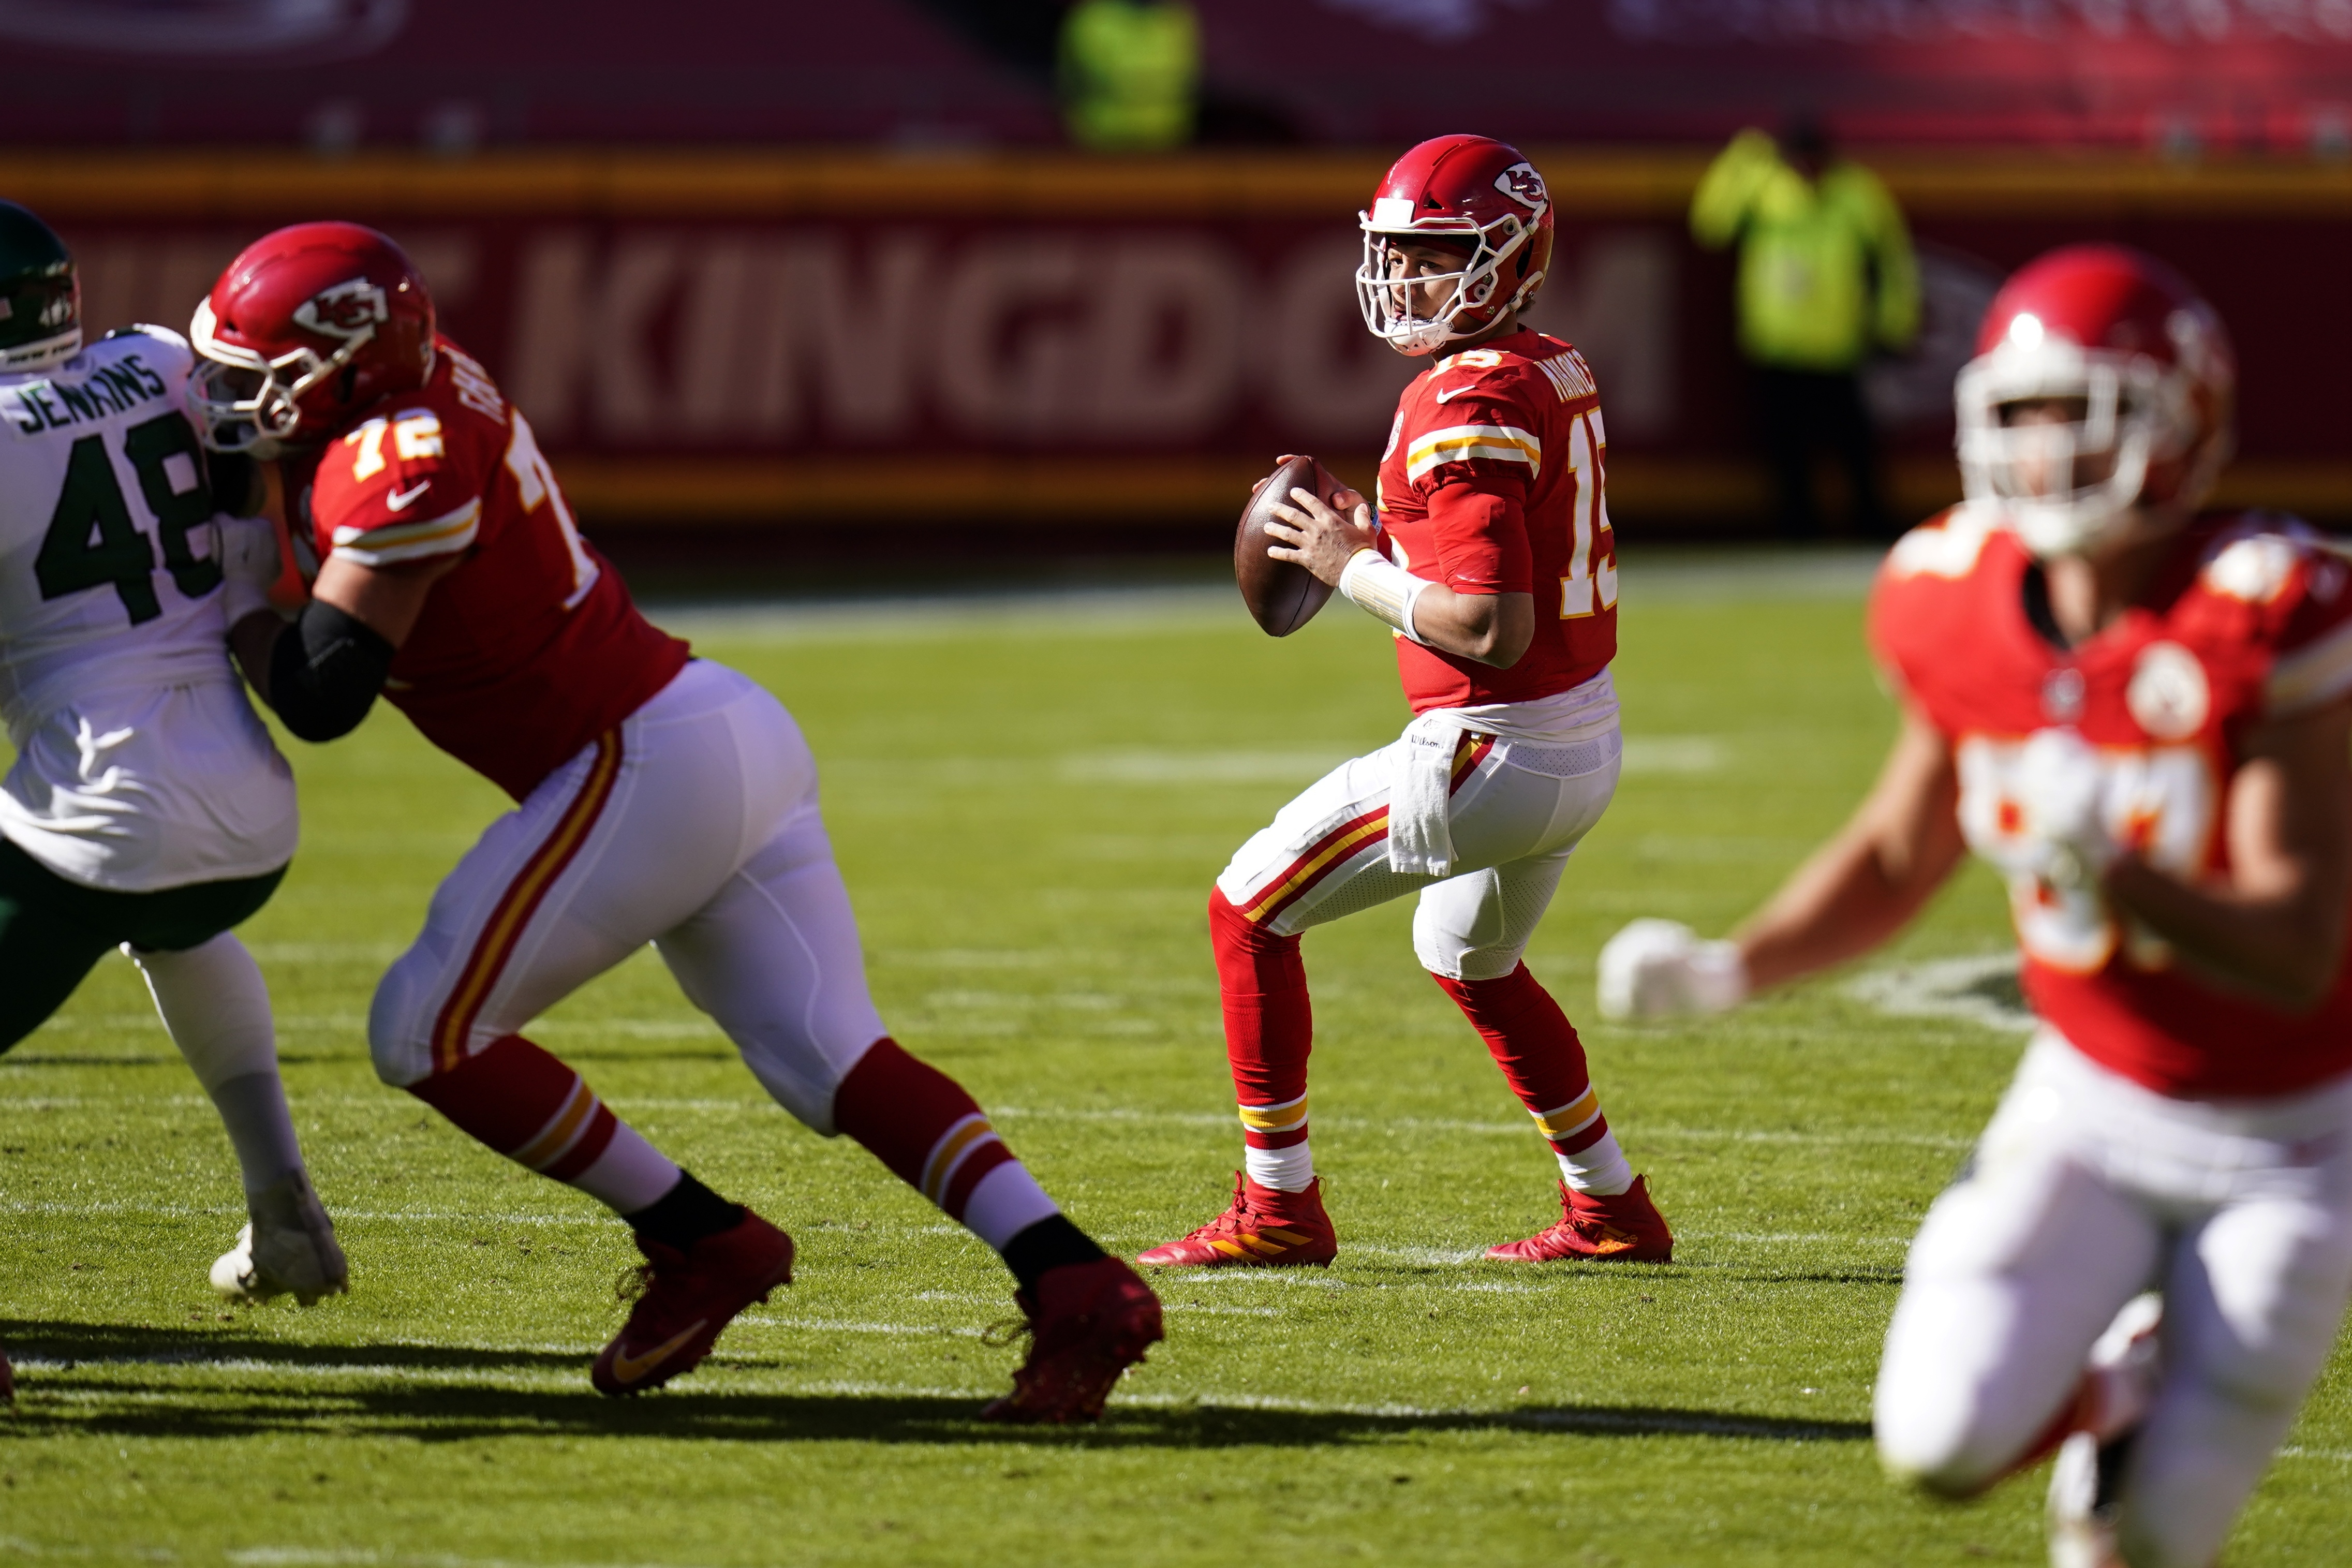 Chiefs at Raiders: Live stream, start time, TV channel, how to watch Sunday Night Football (Week 11)